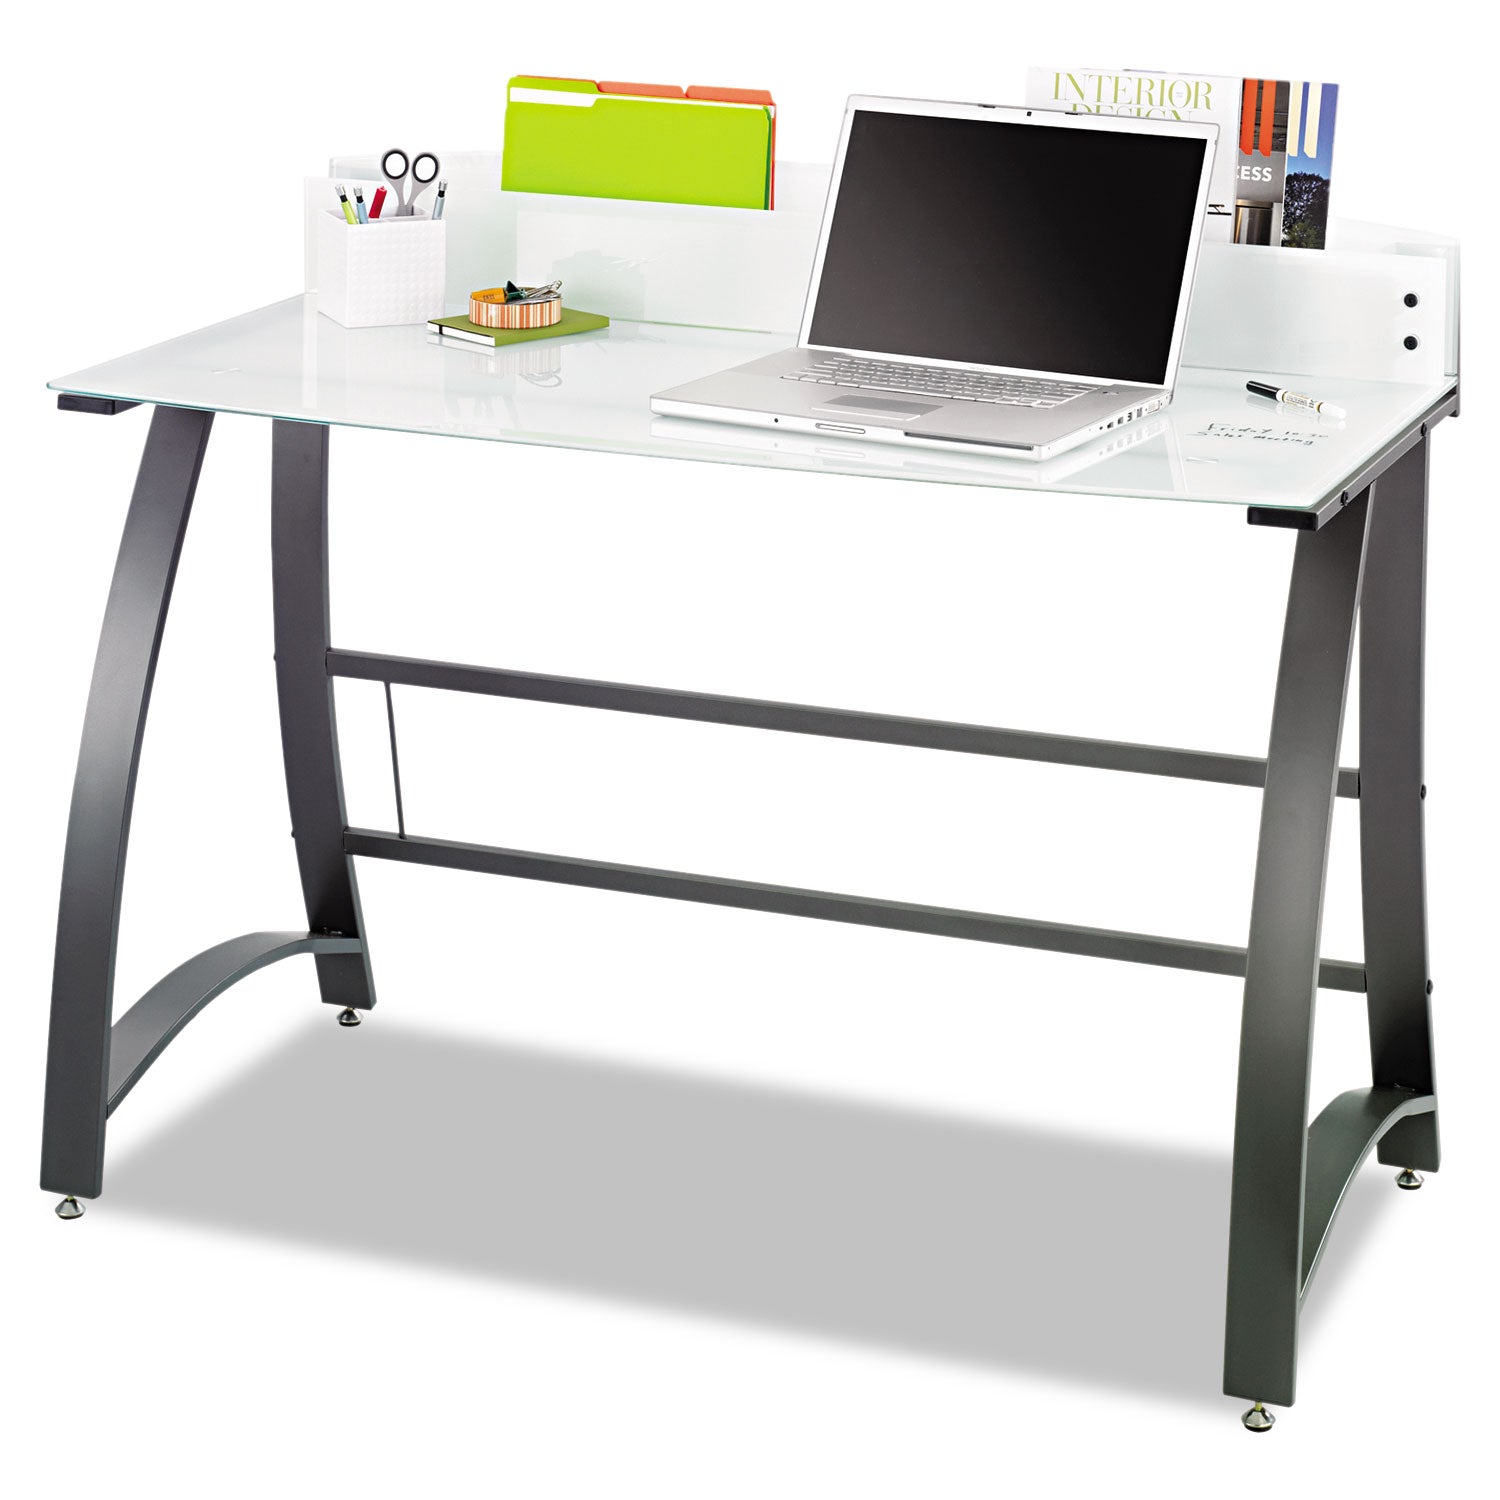 Xpressions 47" Computer Desk, 47" x 23" x 37", Frosted/Black - 